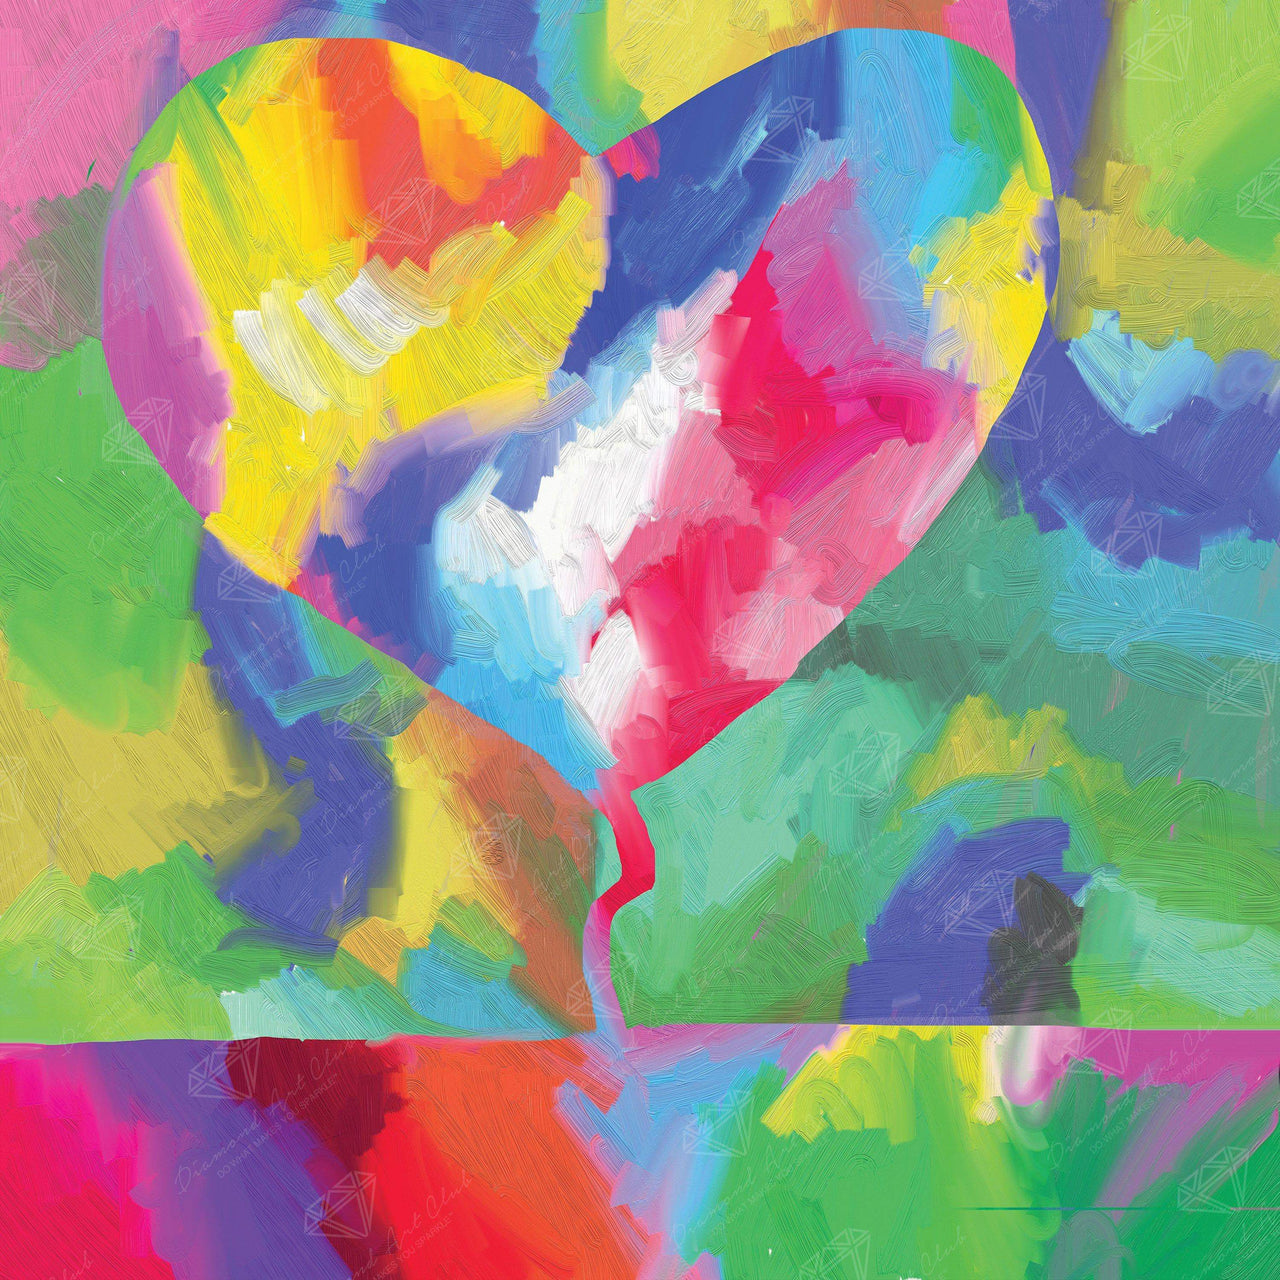 Diamond Painting Heart Balloon 17" x 17″ (41cm x 41cm) / Square with 39 Colors including 4 ABs / 28,900